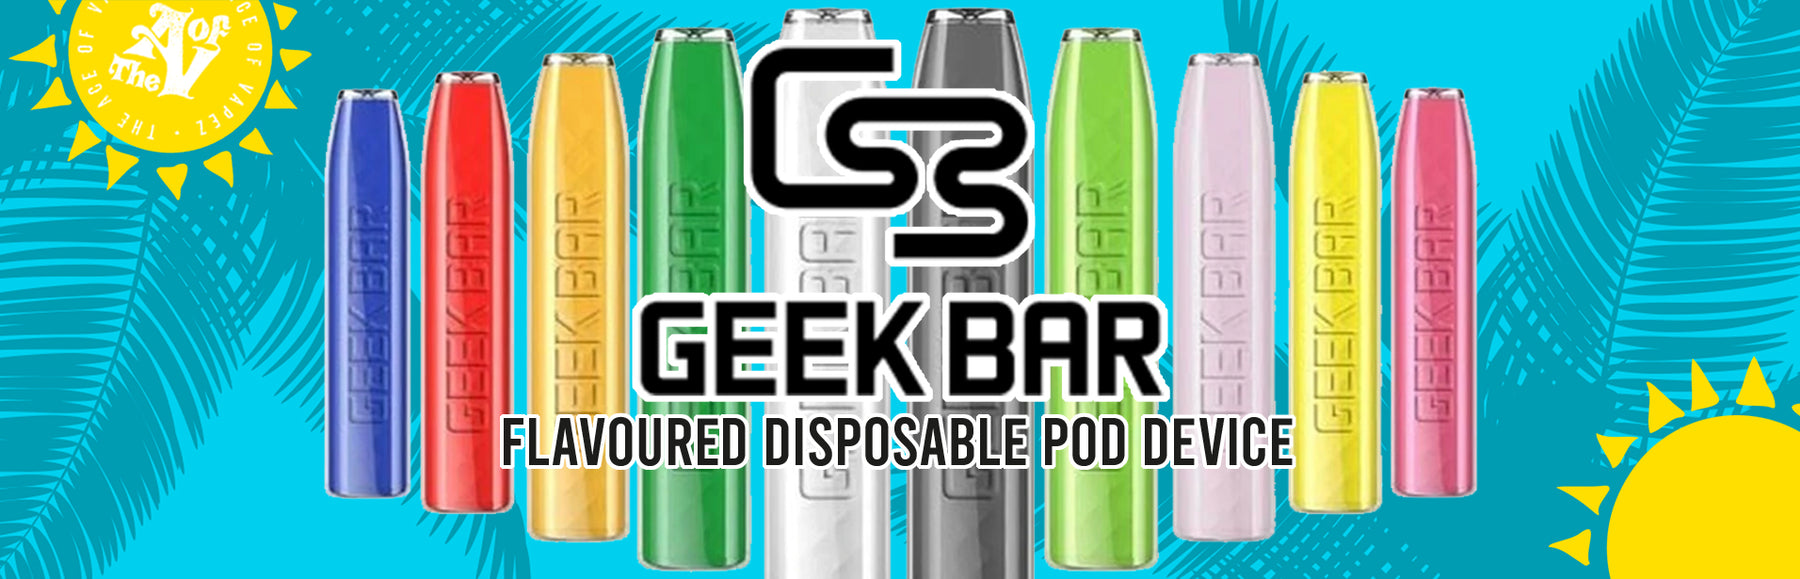 Geekbar - New, fresh and not to be missed!